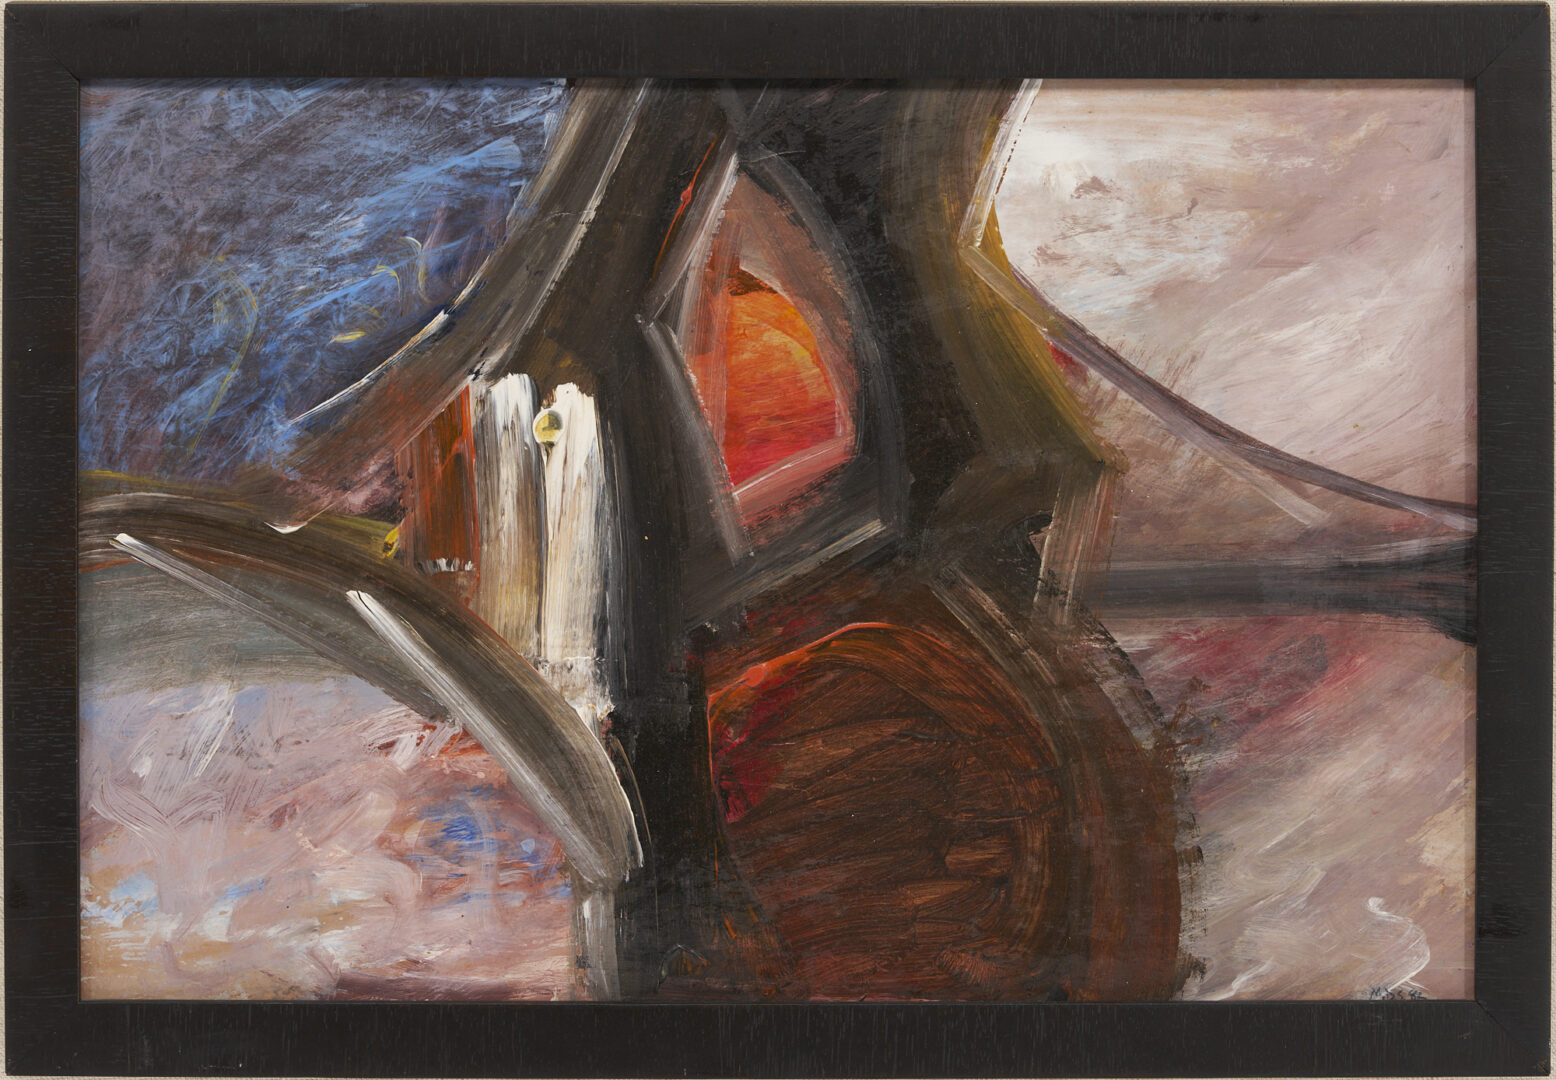 Lot 131: Merton Daniel Simpson, O/B Abstract Expressionist Painting